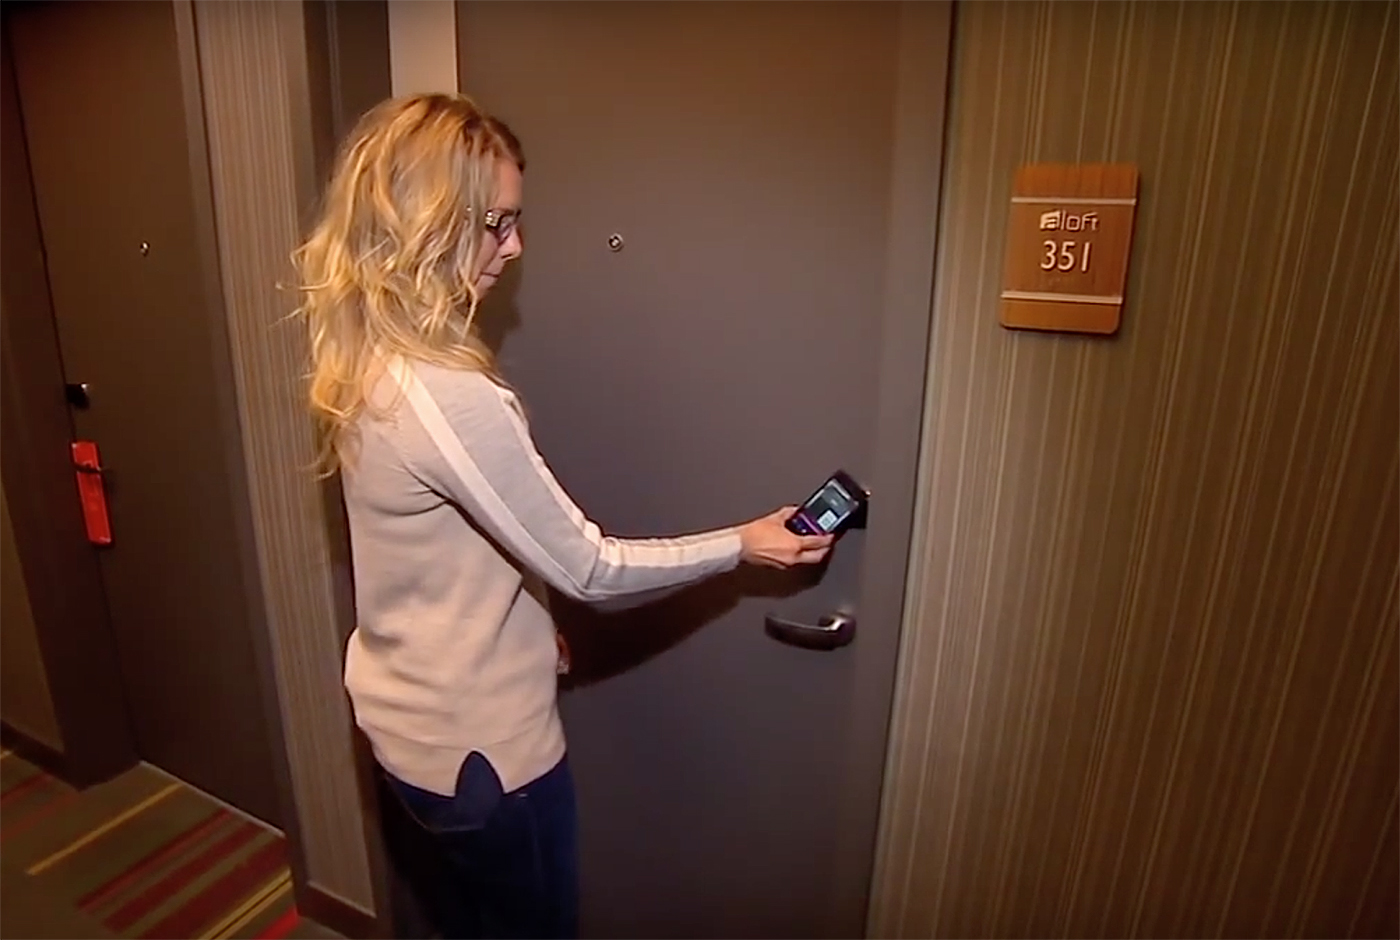 SPG Keyless | Mobile Check-in Experience